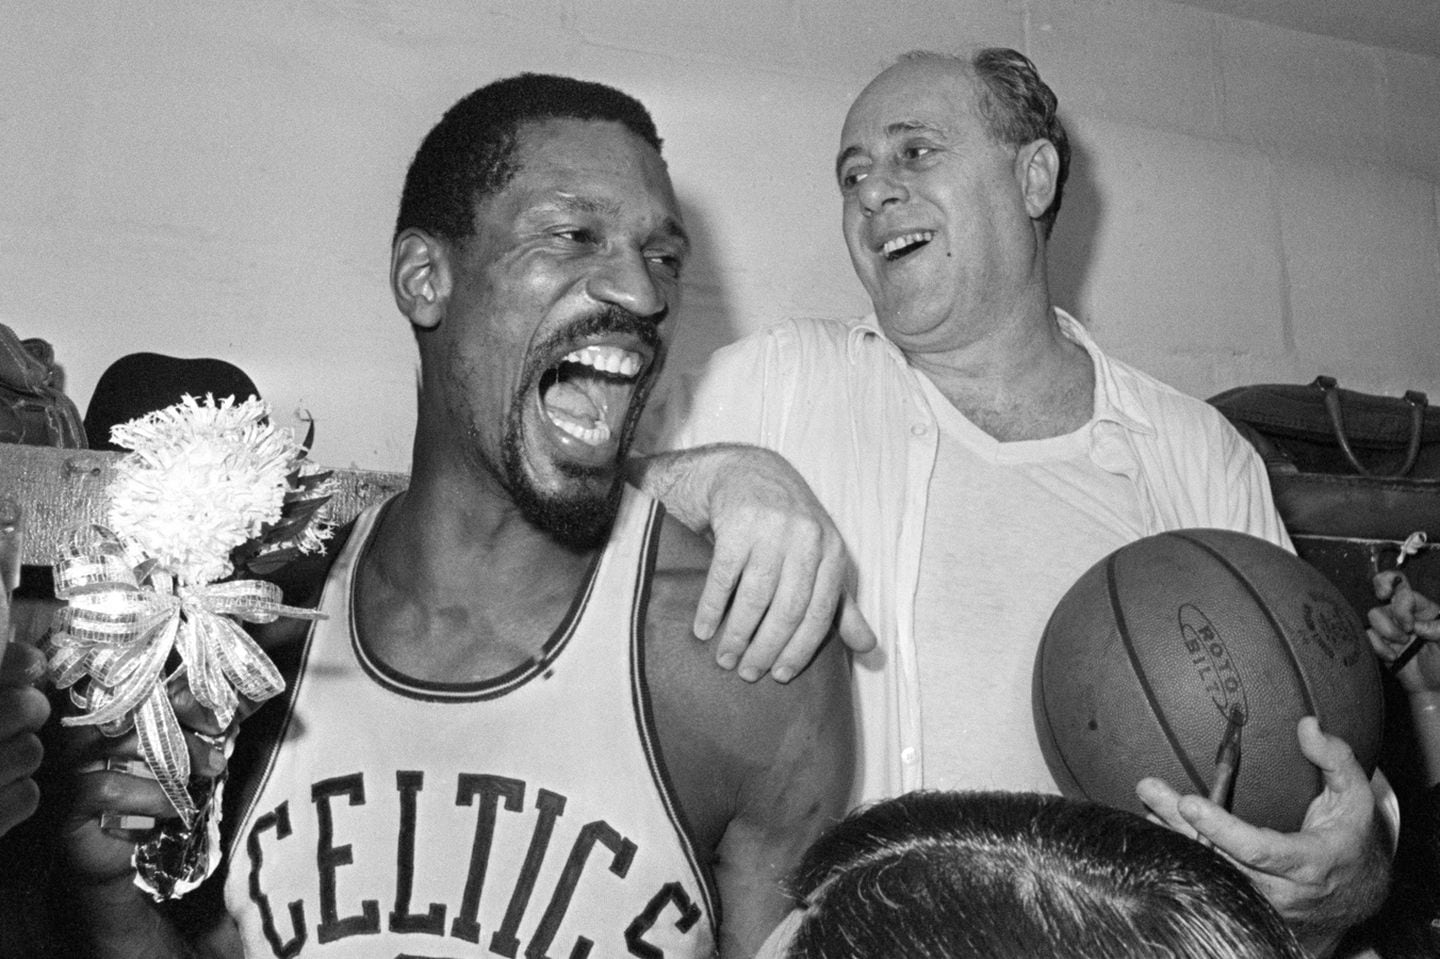 Boston Celtics' Bill Russell, left, held a corsage sent to the dressing room as he celebrated with Celtics coach Red Auerbach after defeating the Los Angeles Lakers, 95-93, to win their eighth-straight NBA Championship, in Boston, April 29, 1966.